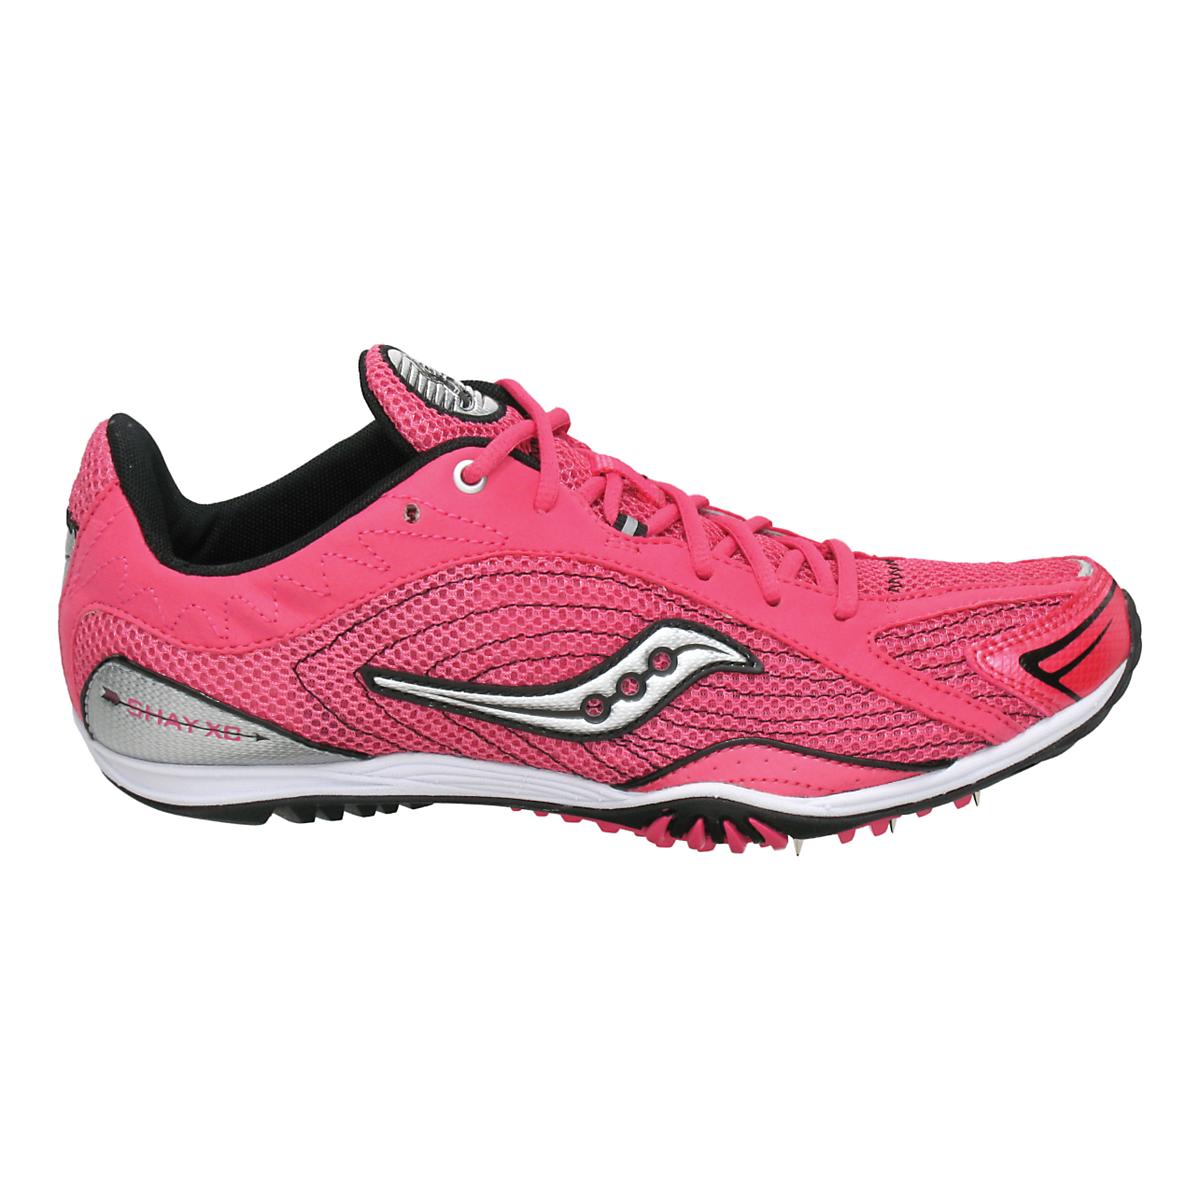 Womens Saucony Shay XC Spike Cross Country Shoe at Road Runner Sports